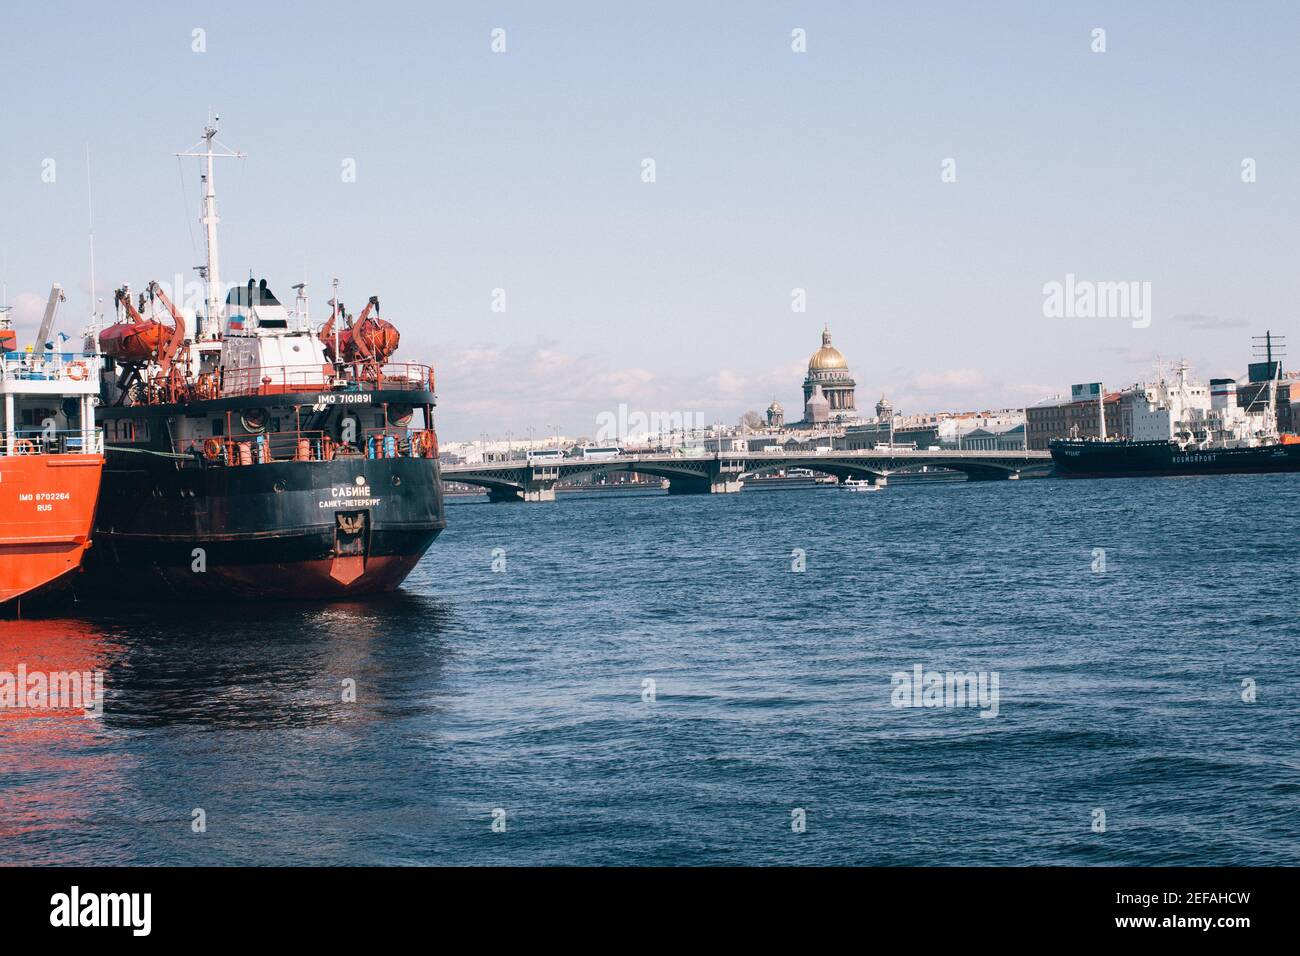 SAINT PETERSBURG, RUSSIA - May 01, 2019: Military Ships staying in the sea bay near the bridge and cathedrals, Saint Petersburg, Russia Stock Photo